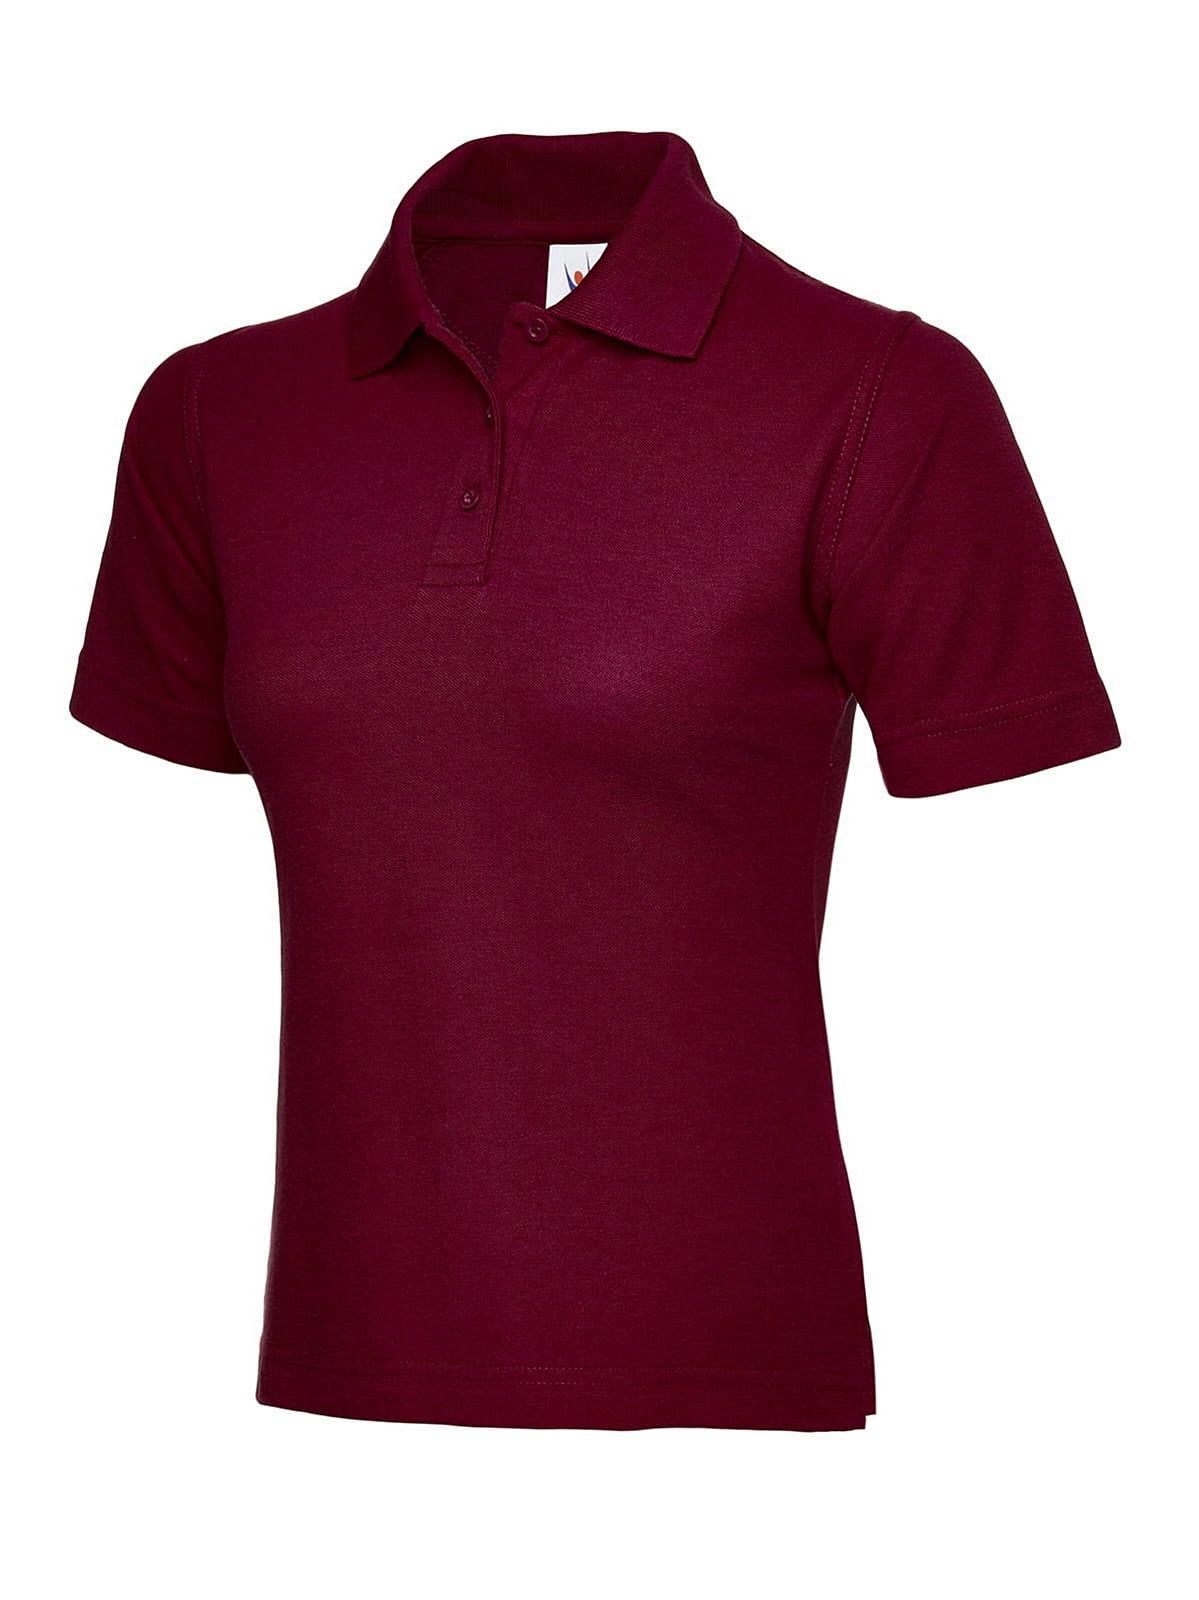 Uneek 220GSM Womens Polo Shirt in Maroon (Product Code: UC106)